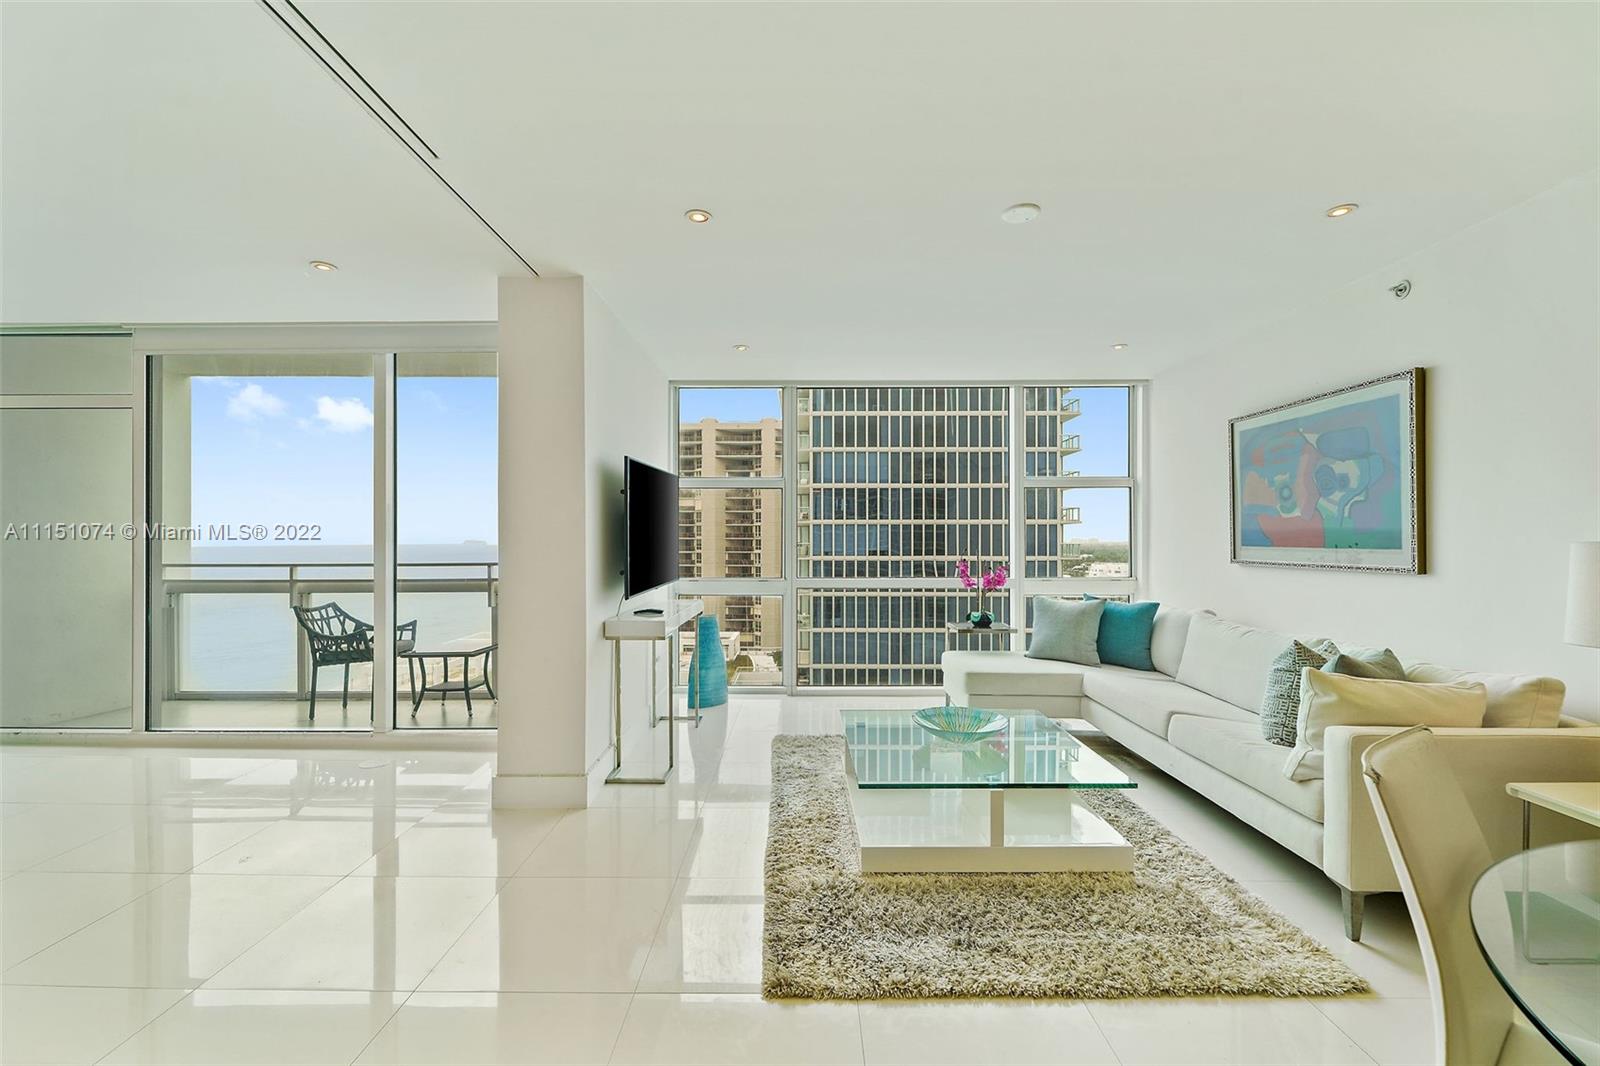 Listing Image 6801 Collins Ave #1206